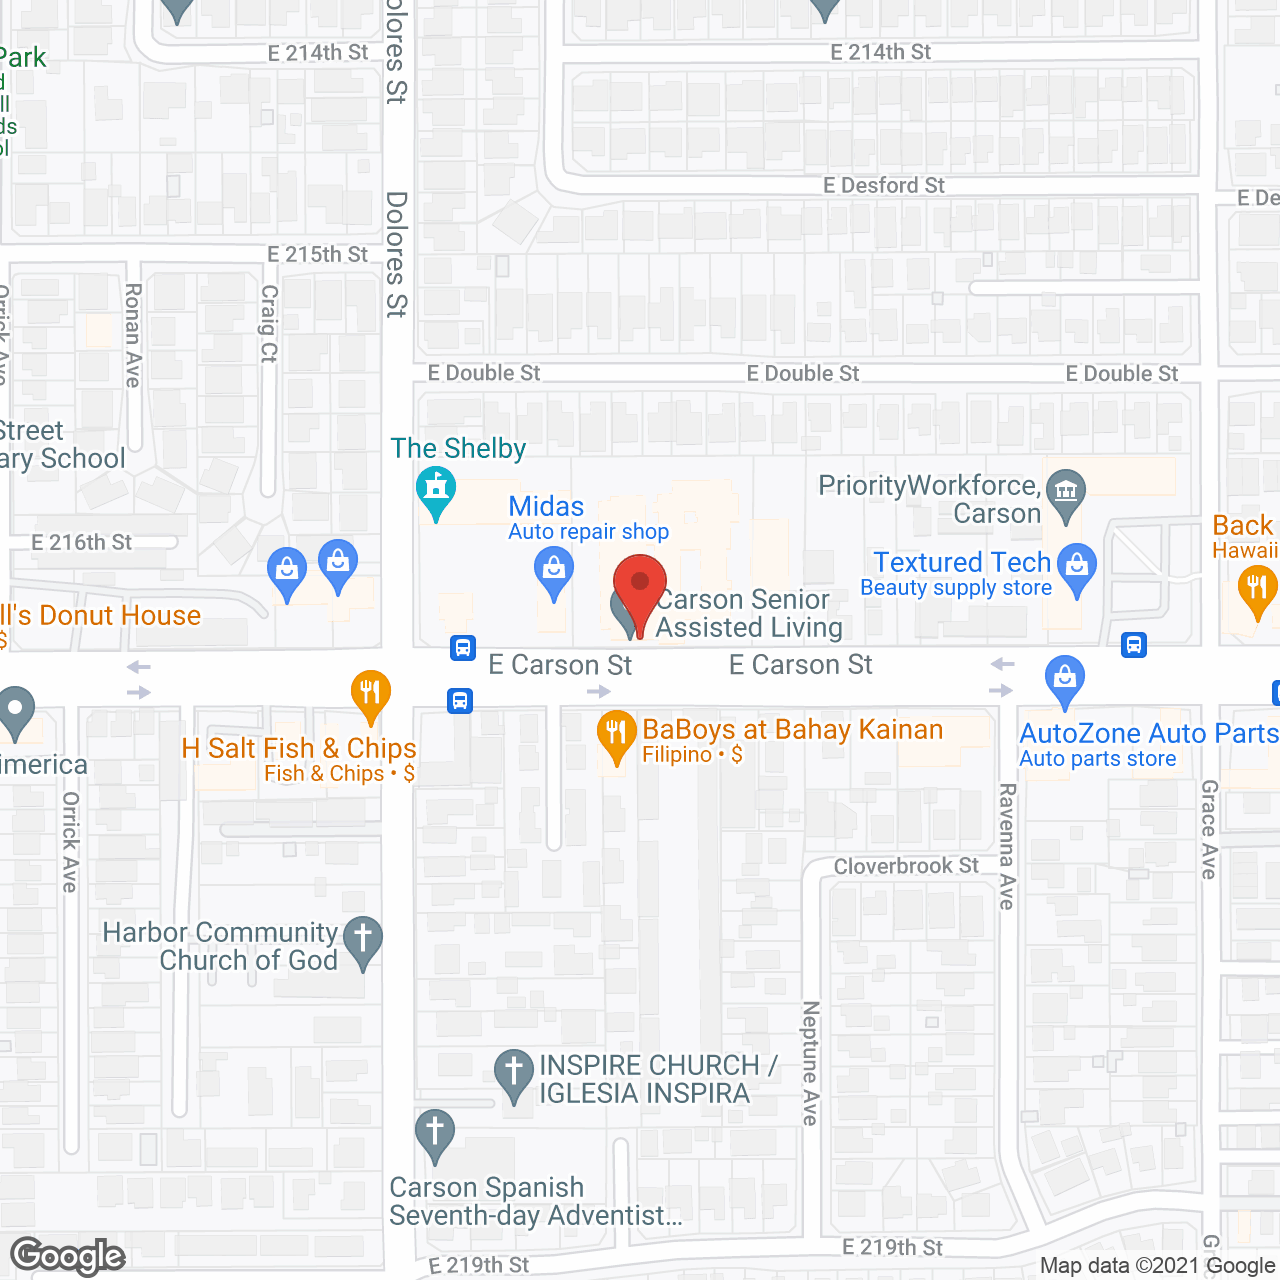 Carson Senior Assisted Living in google map